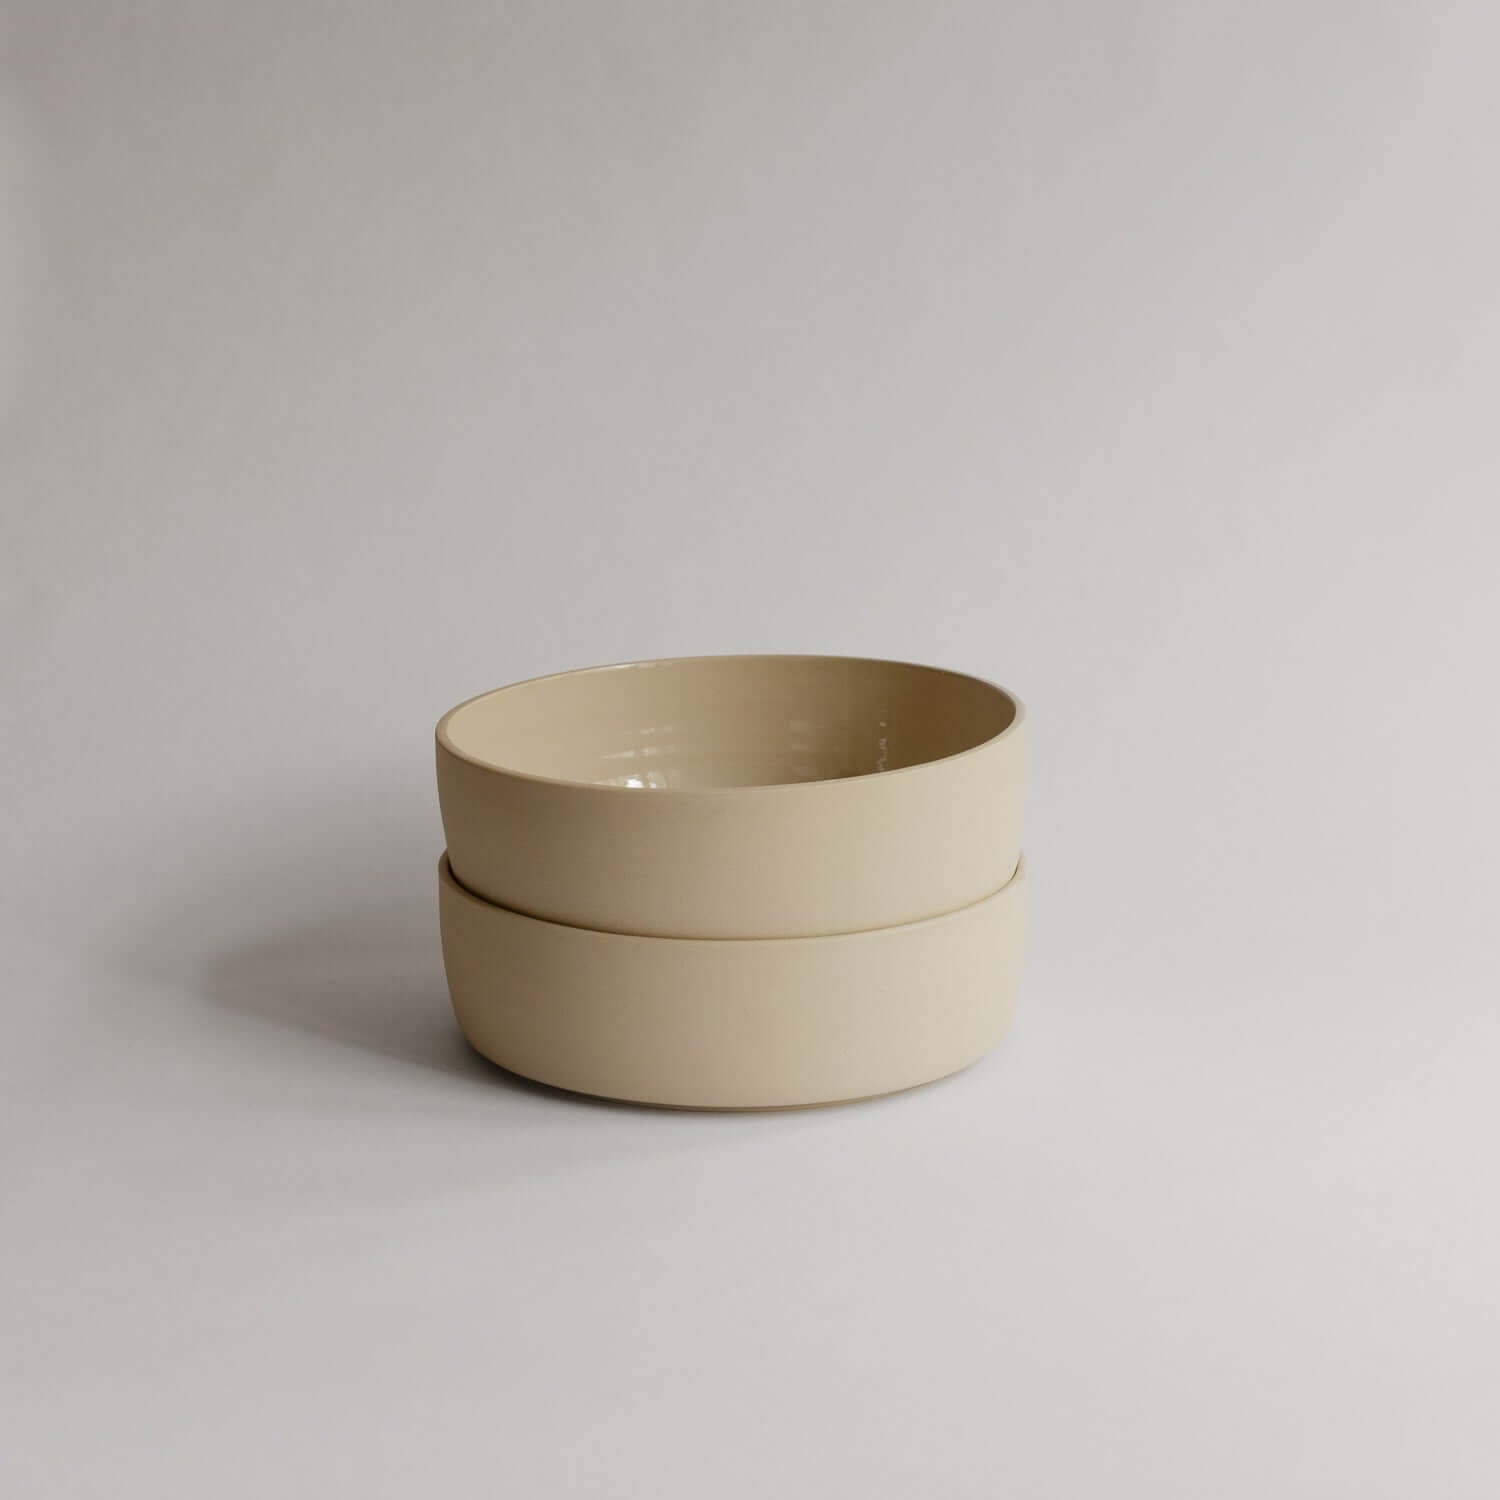 Elevate your dining with the unique Nomi Creme Pasta Bowl. Handmade grey stoneware with a glossy glaze. Perfect tableware for a modern touch. von viola beuscher ceramics